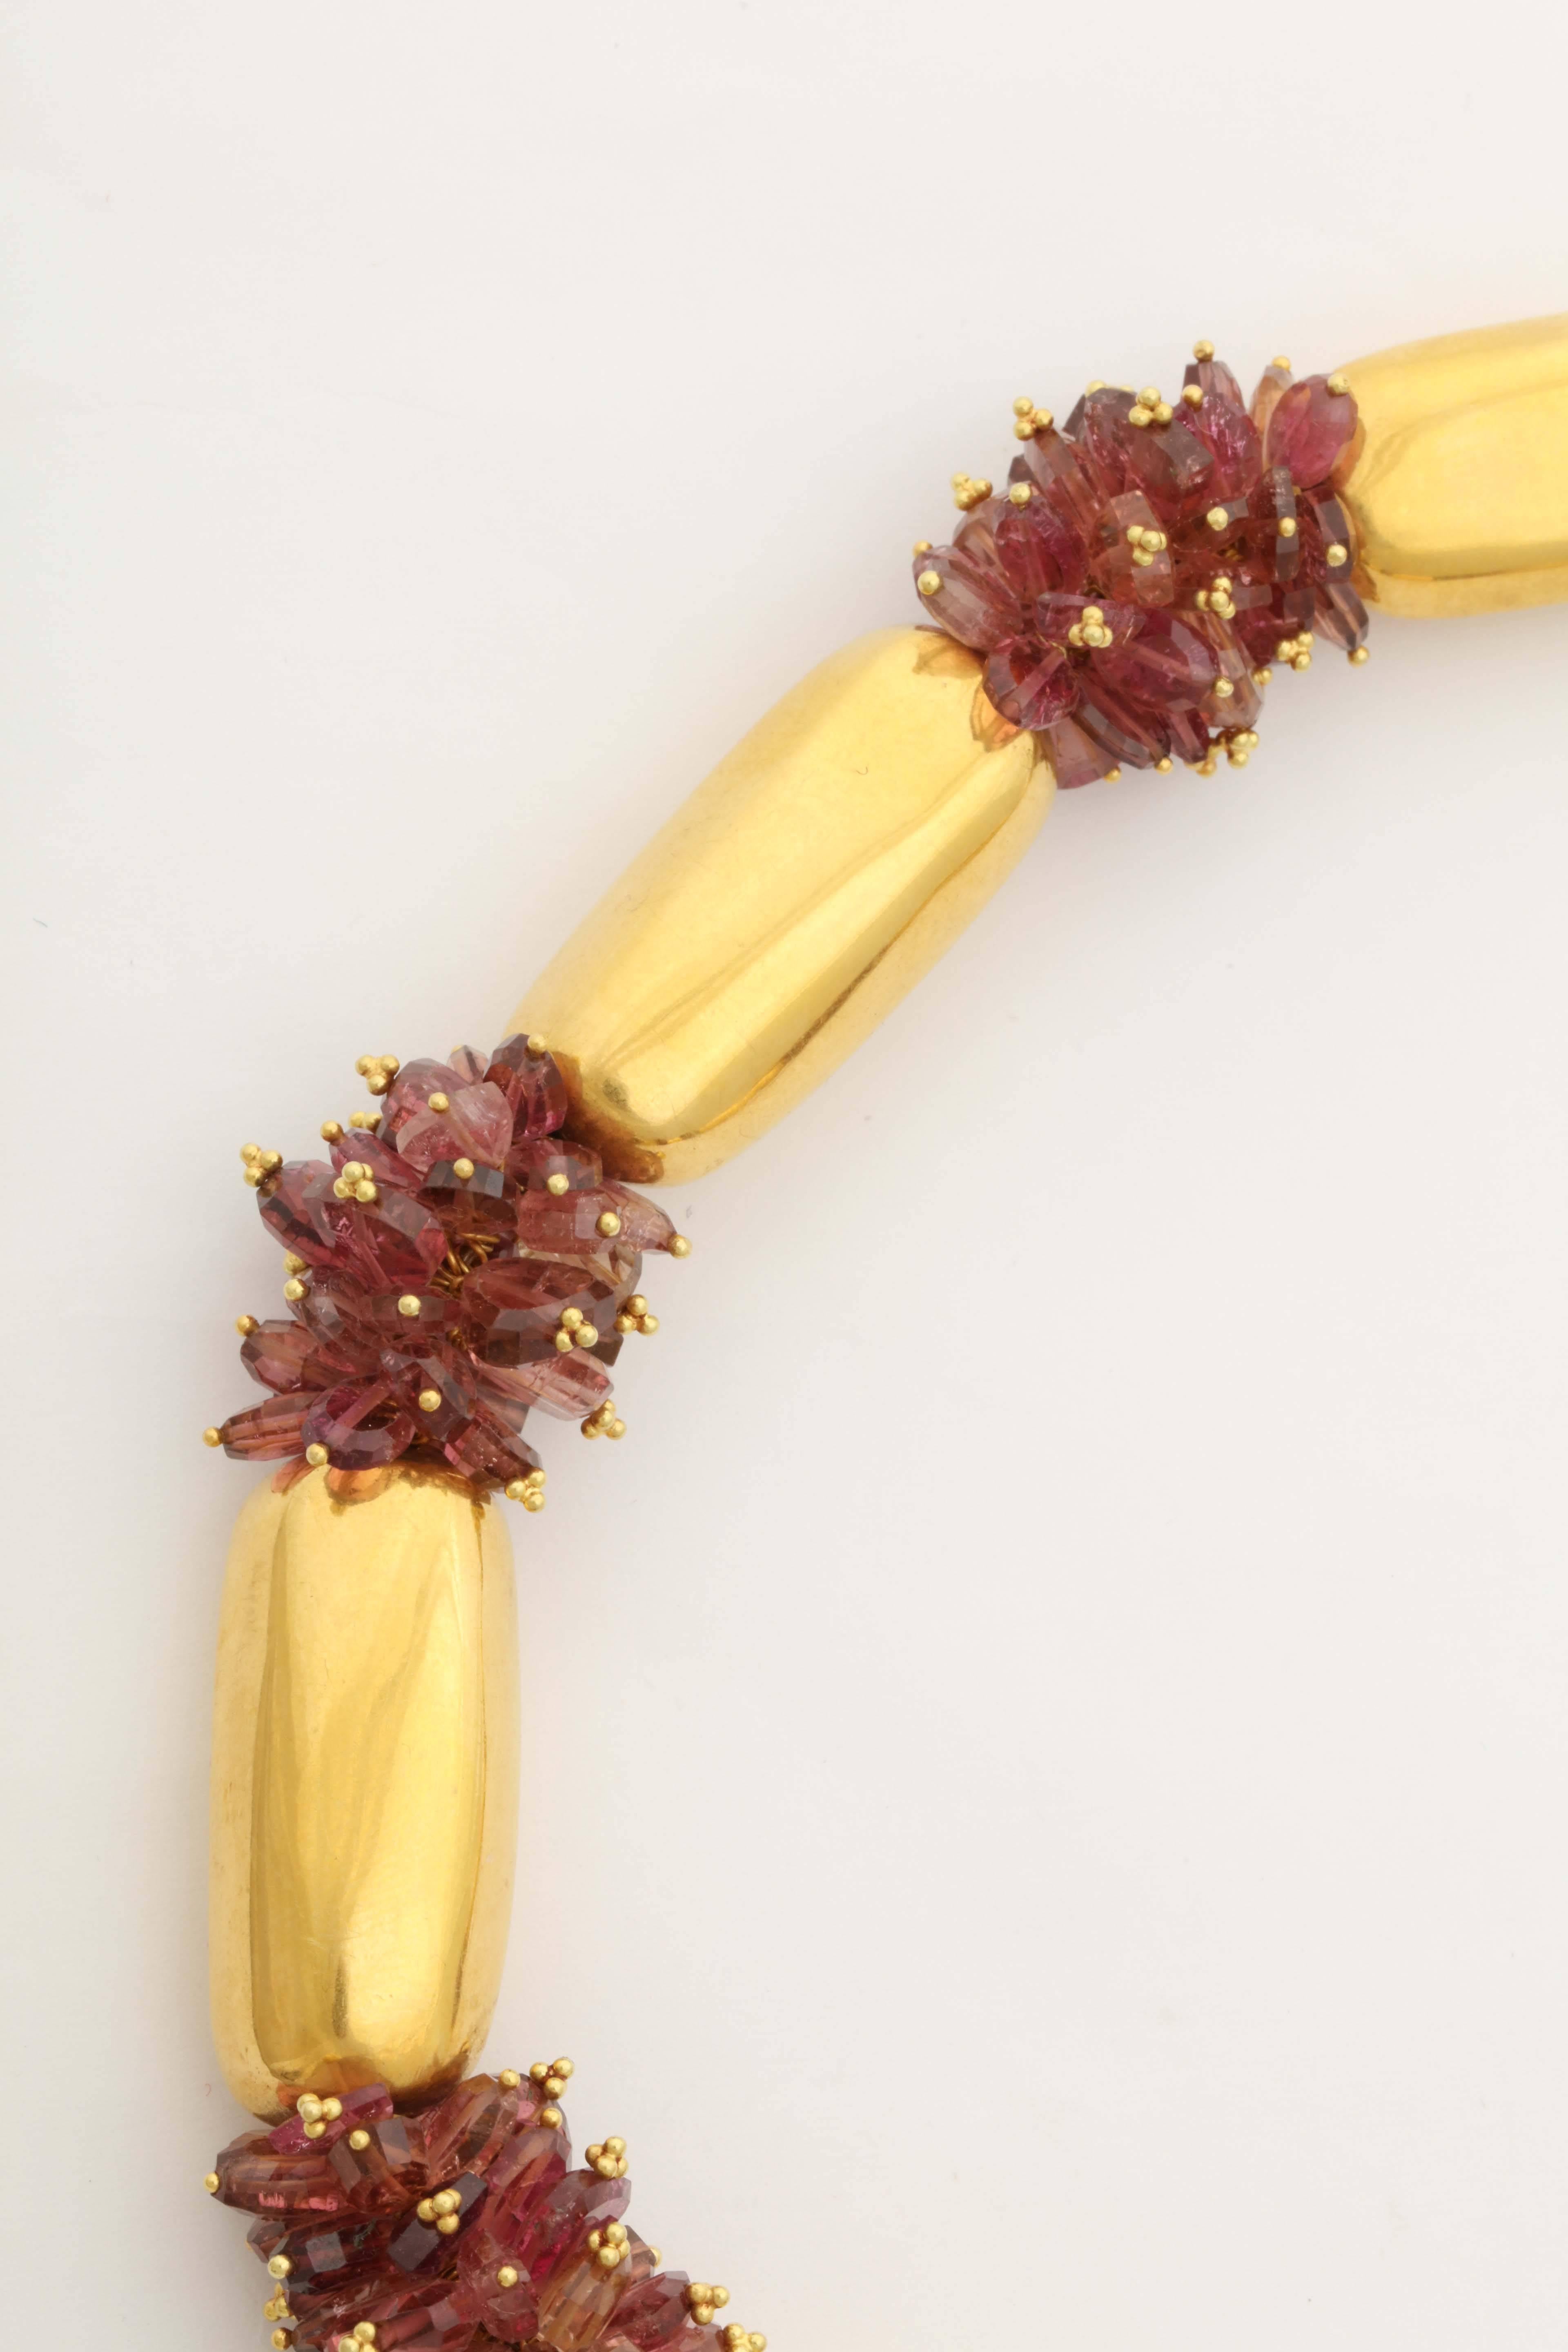 A necklace composed of 18kt yellow gold beads and clusters of pink sapphire and tourmaline beads. Each sapphire and tourmaline bead has been turned into a drop using an 18kt yellow gold bud headpin. The drops are then stacked to form clusters, which